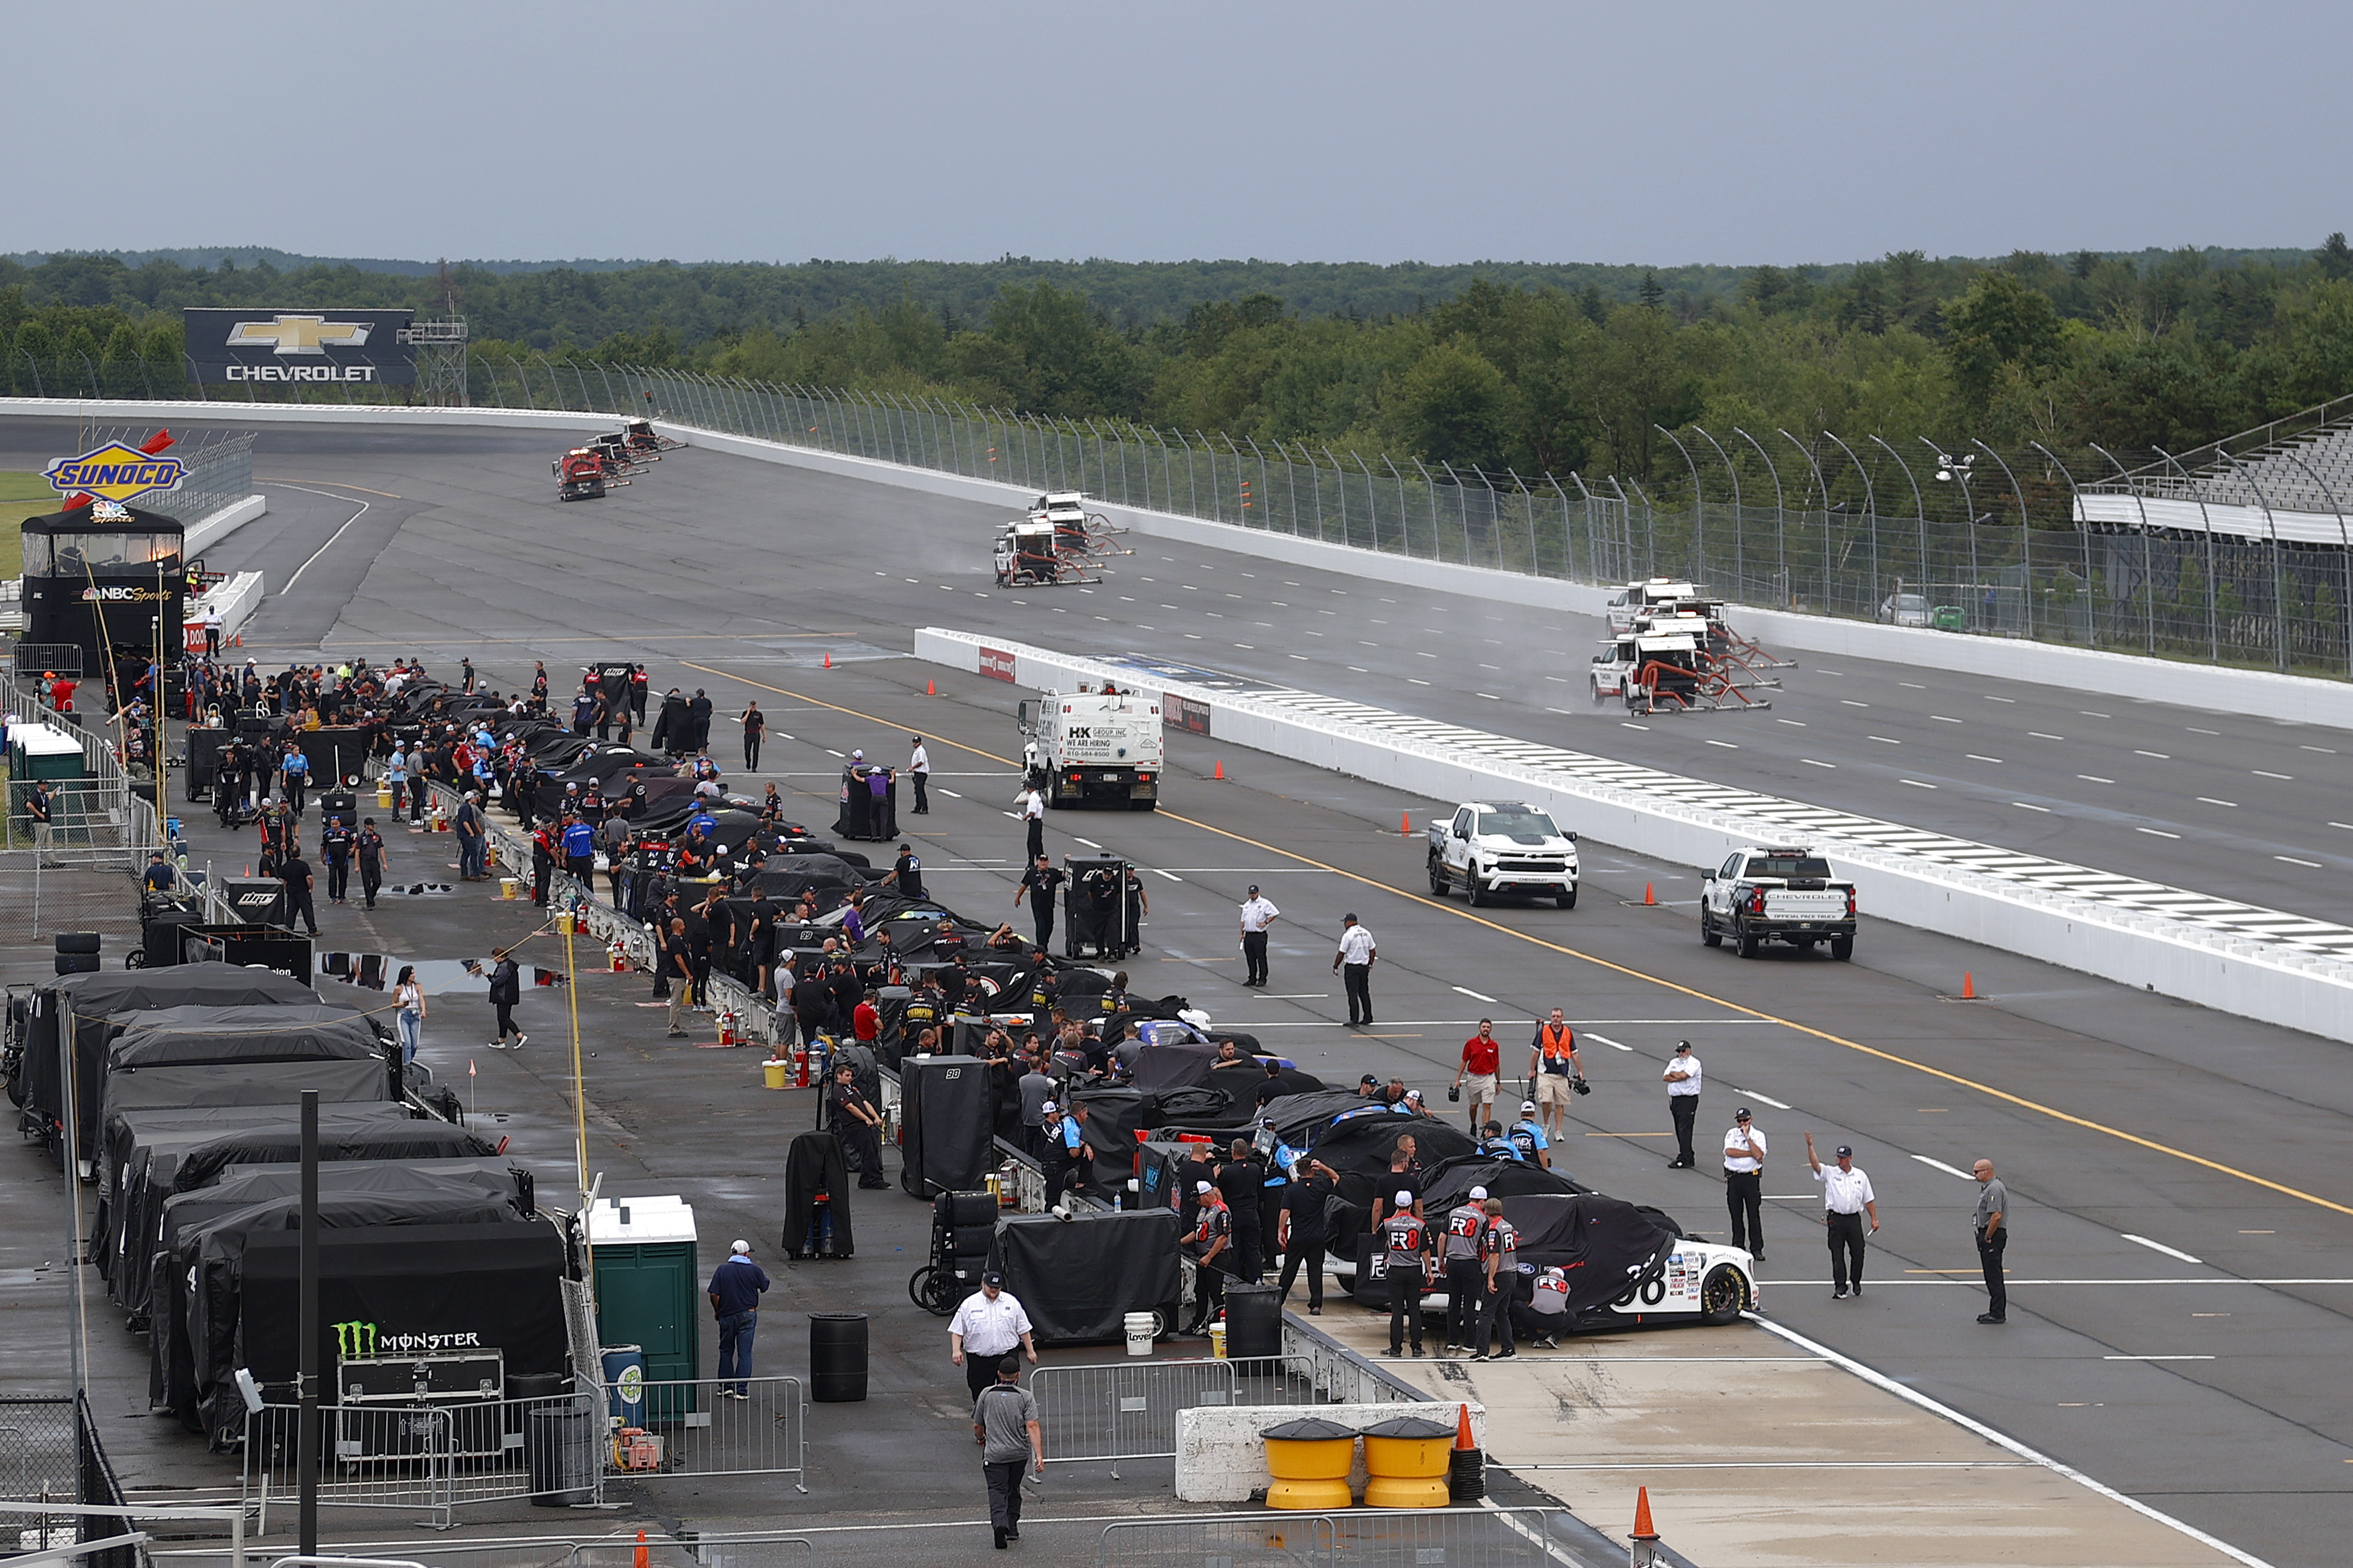 A general view of the track prior to a weather cancellation of practice and qualifying for the NASCAR Camping World Truck Series CRC Brakleen 150 at Pocono Raceway on July 22, 2022 in Long Pond, Pennsylvania.